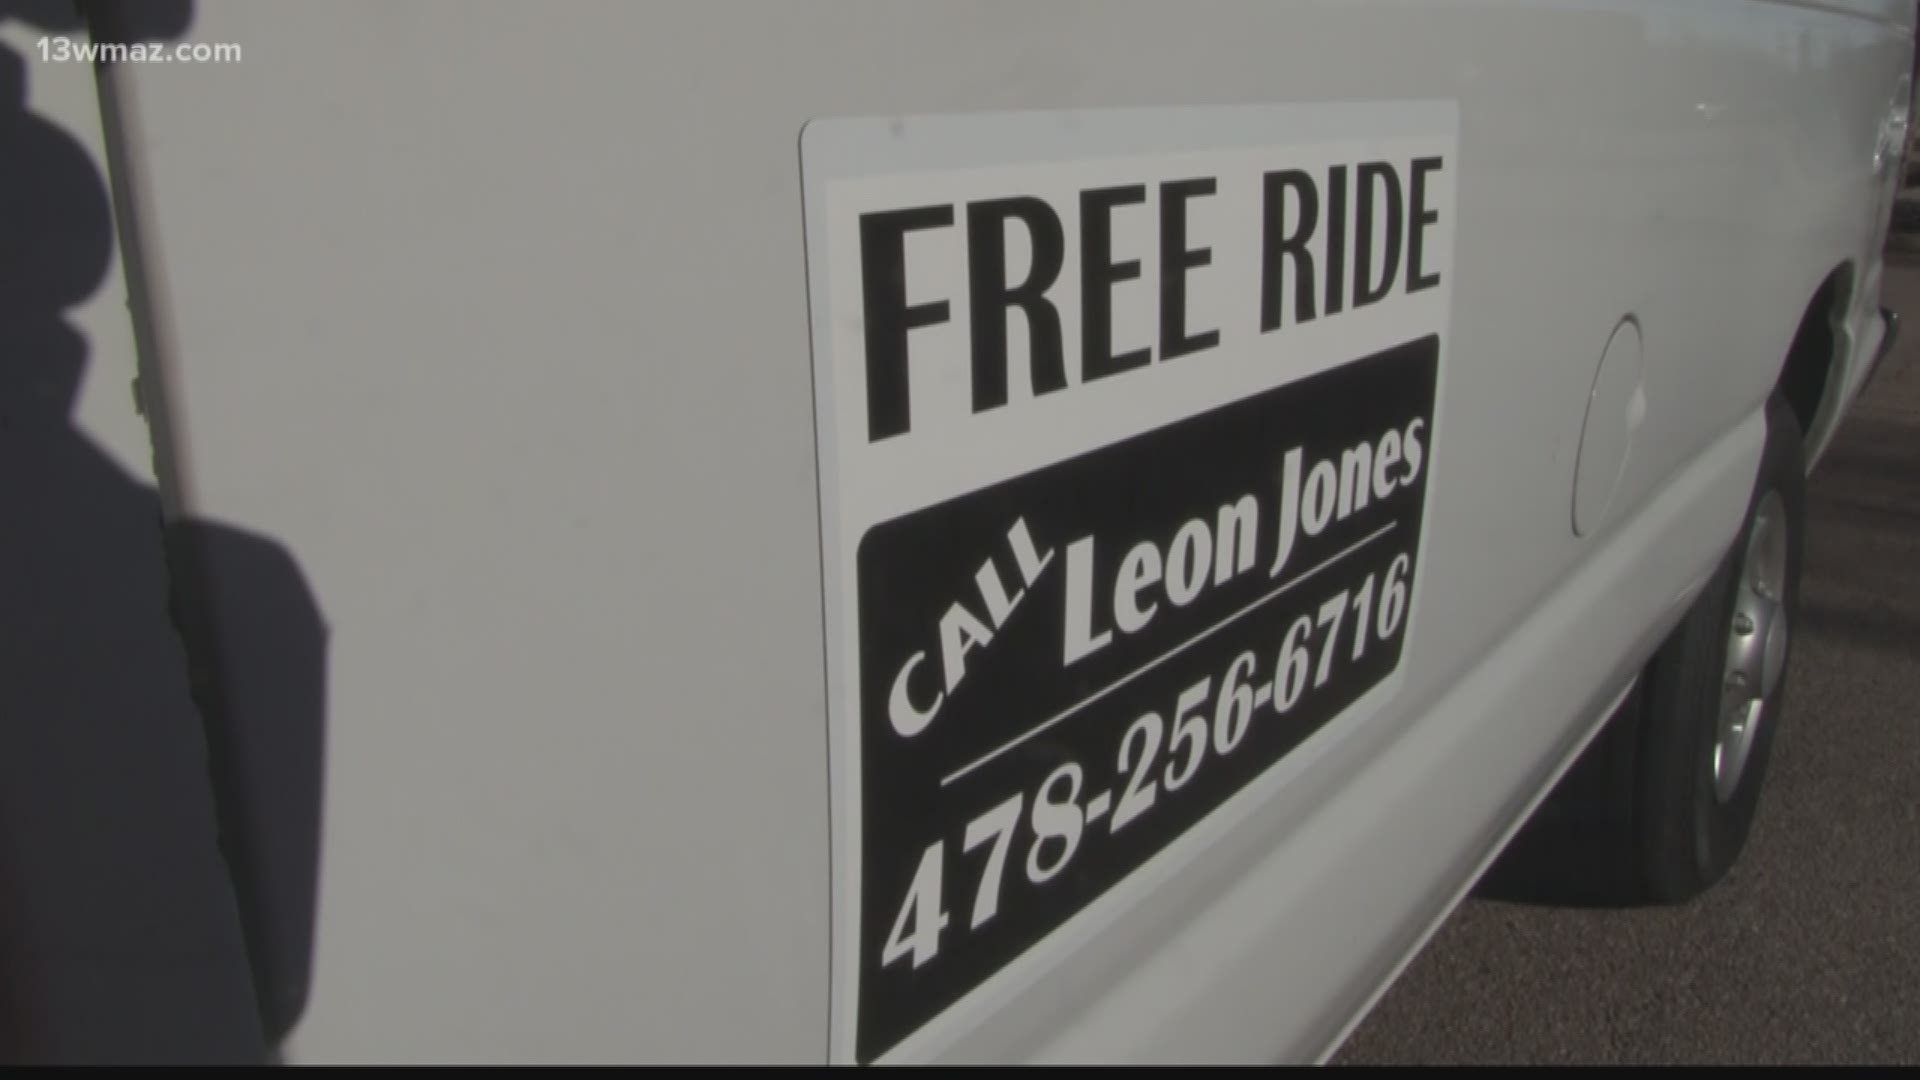 Bibb County Chief Coroner Leon Jones is offering free rides to folks on New Year's Eve to help prevent drunk driving.